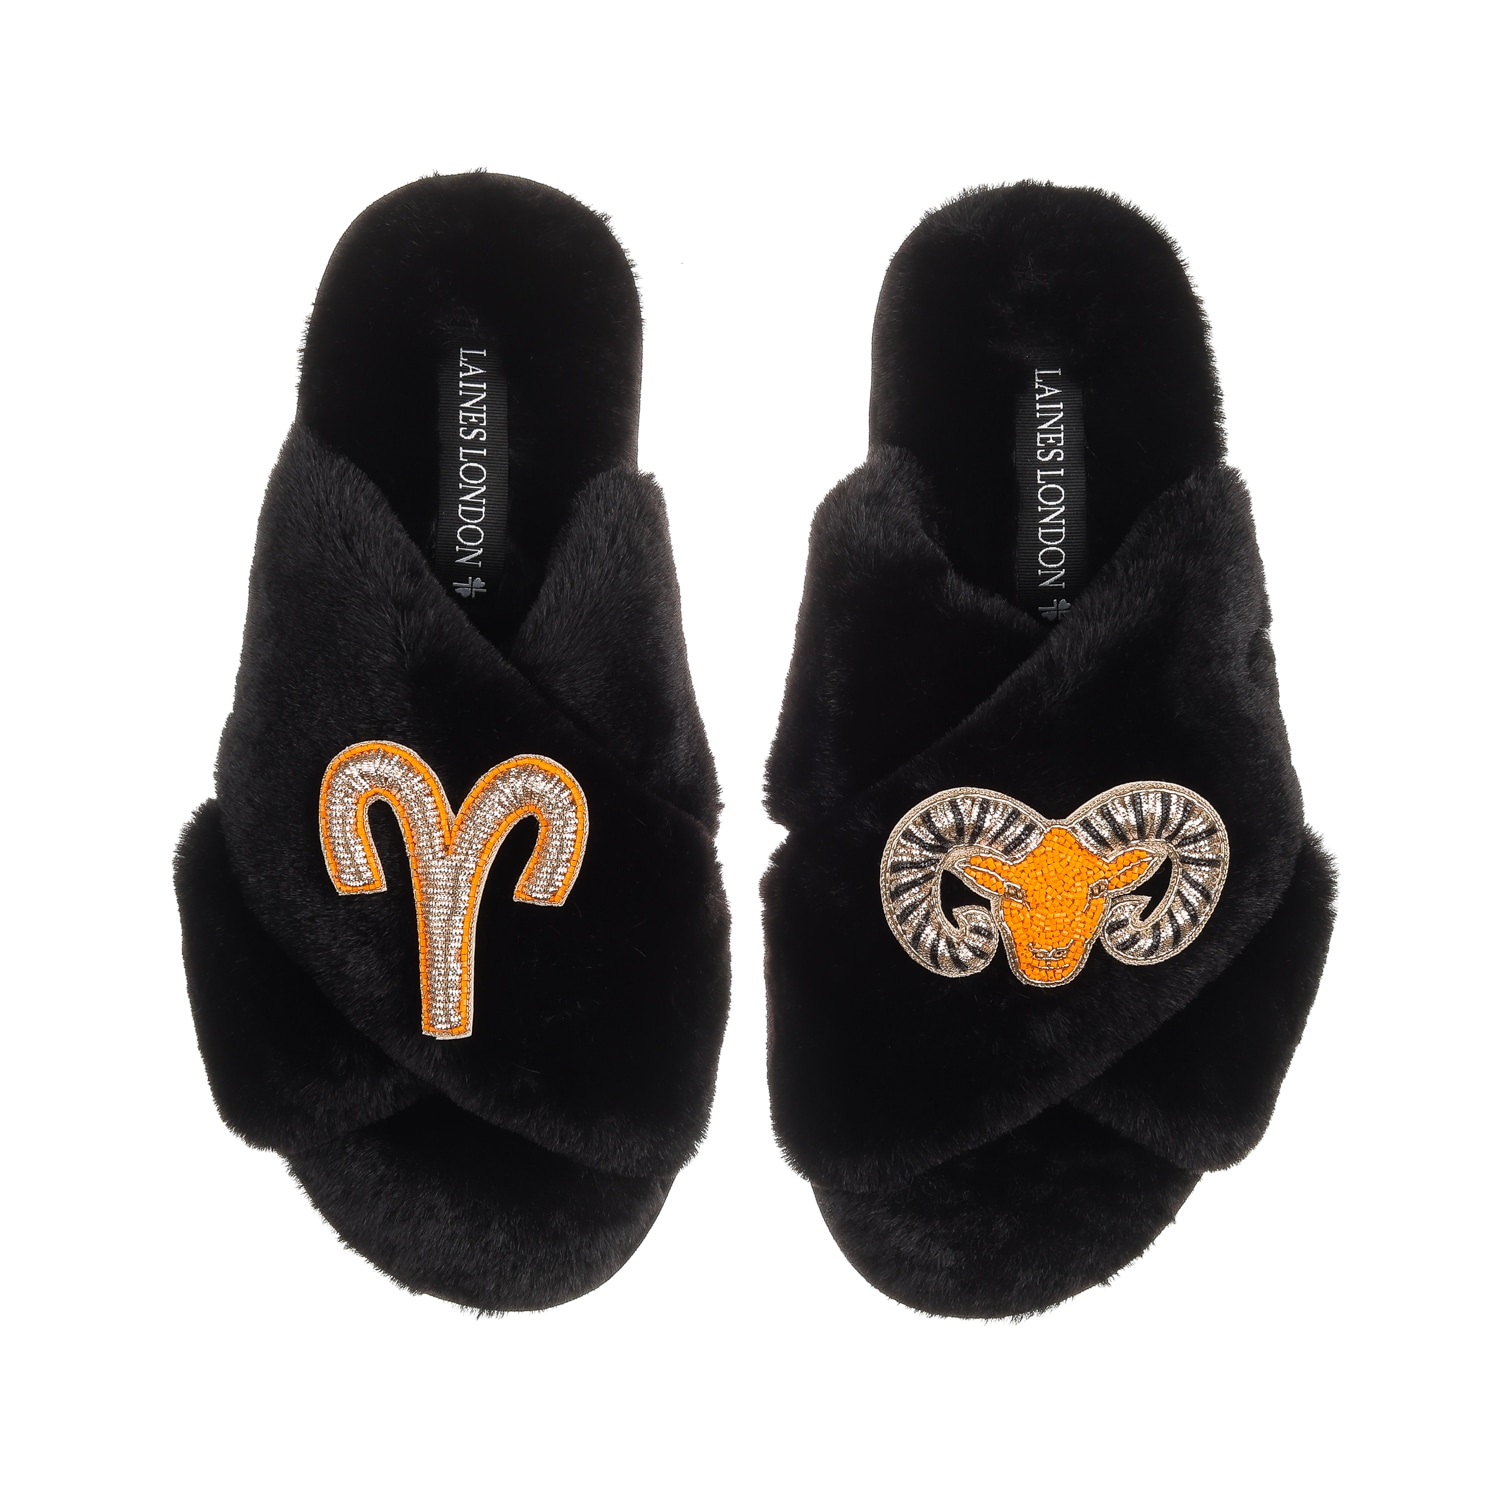 Laines London Women's Classic Laines Slippers With Aries Zodiac Brooches - Black